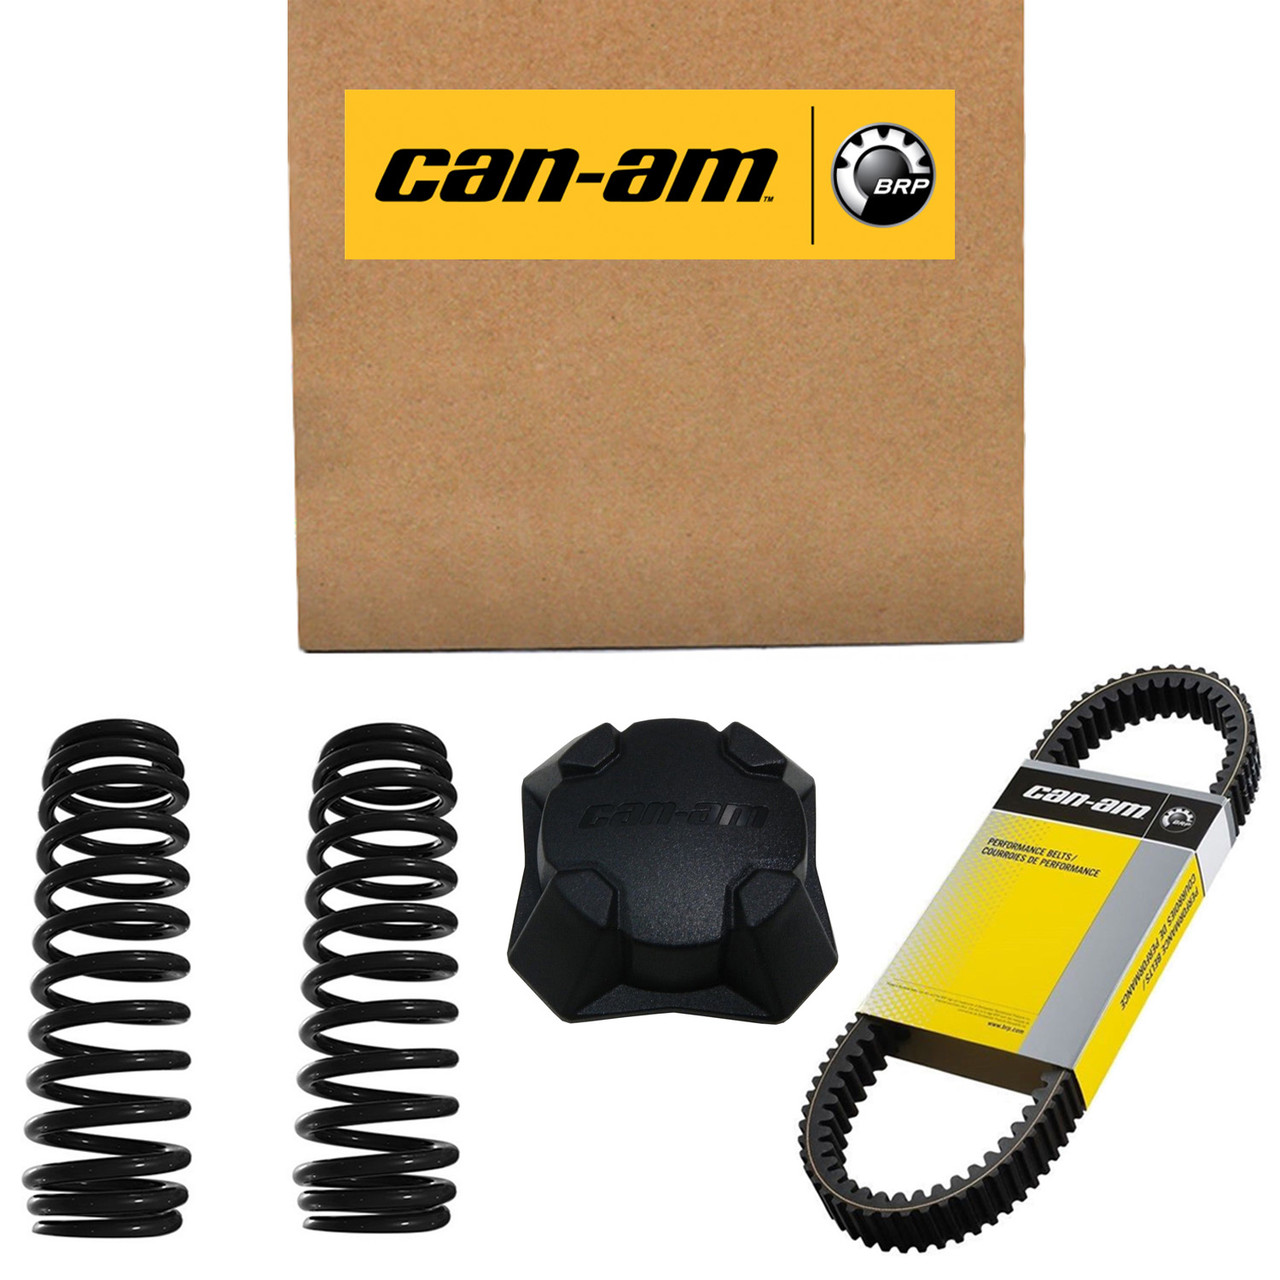 Can-Am New OEM Wiring Harness, 420266788